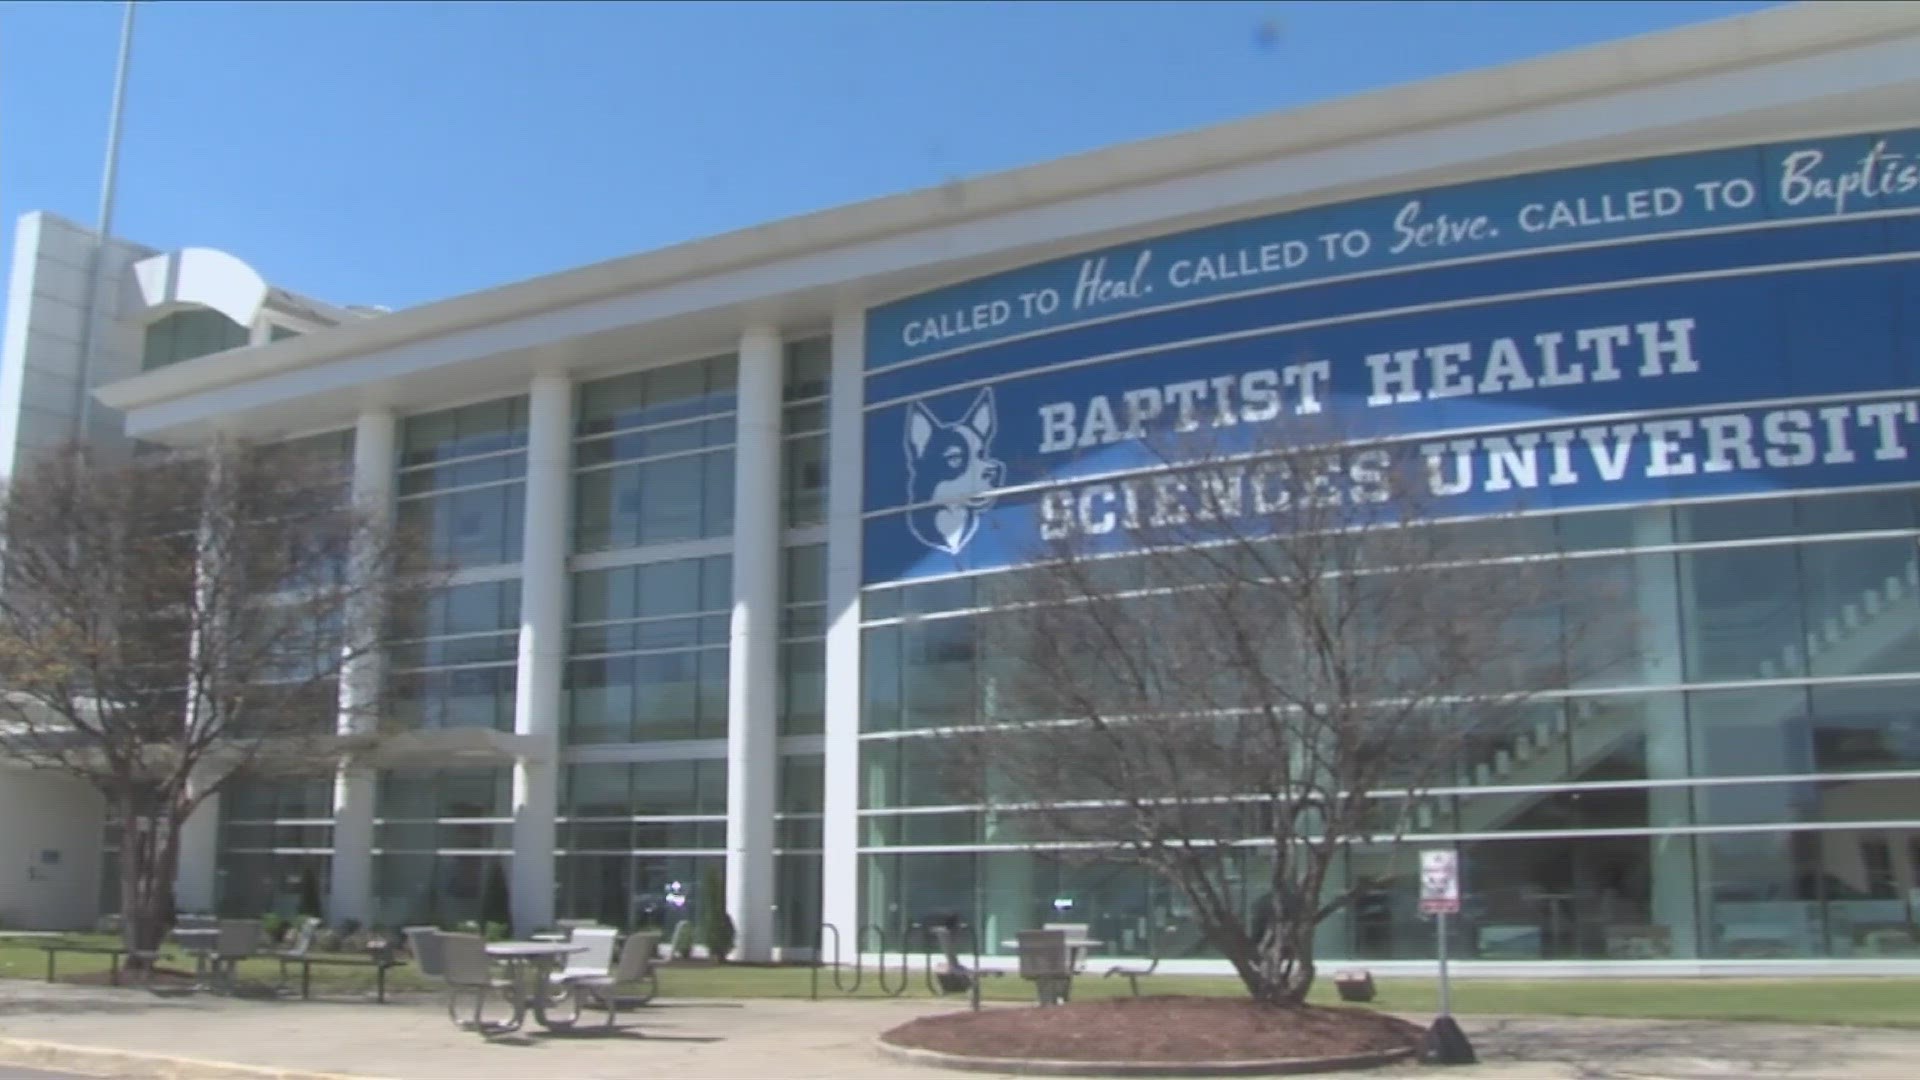 It’s the first osteopathic medical school in West Tennessee and the second in the state.